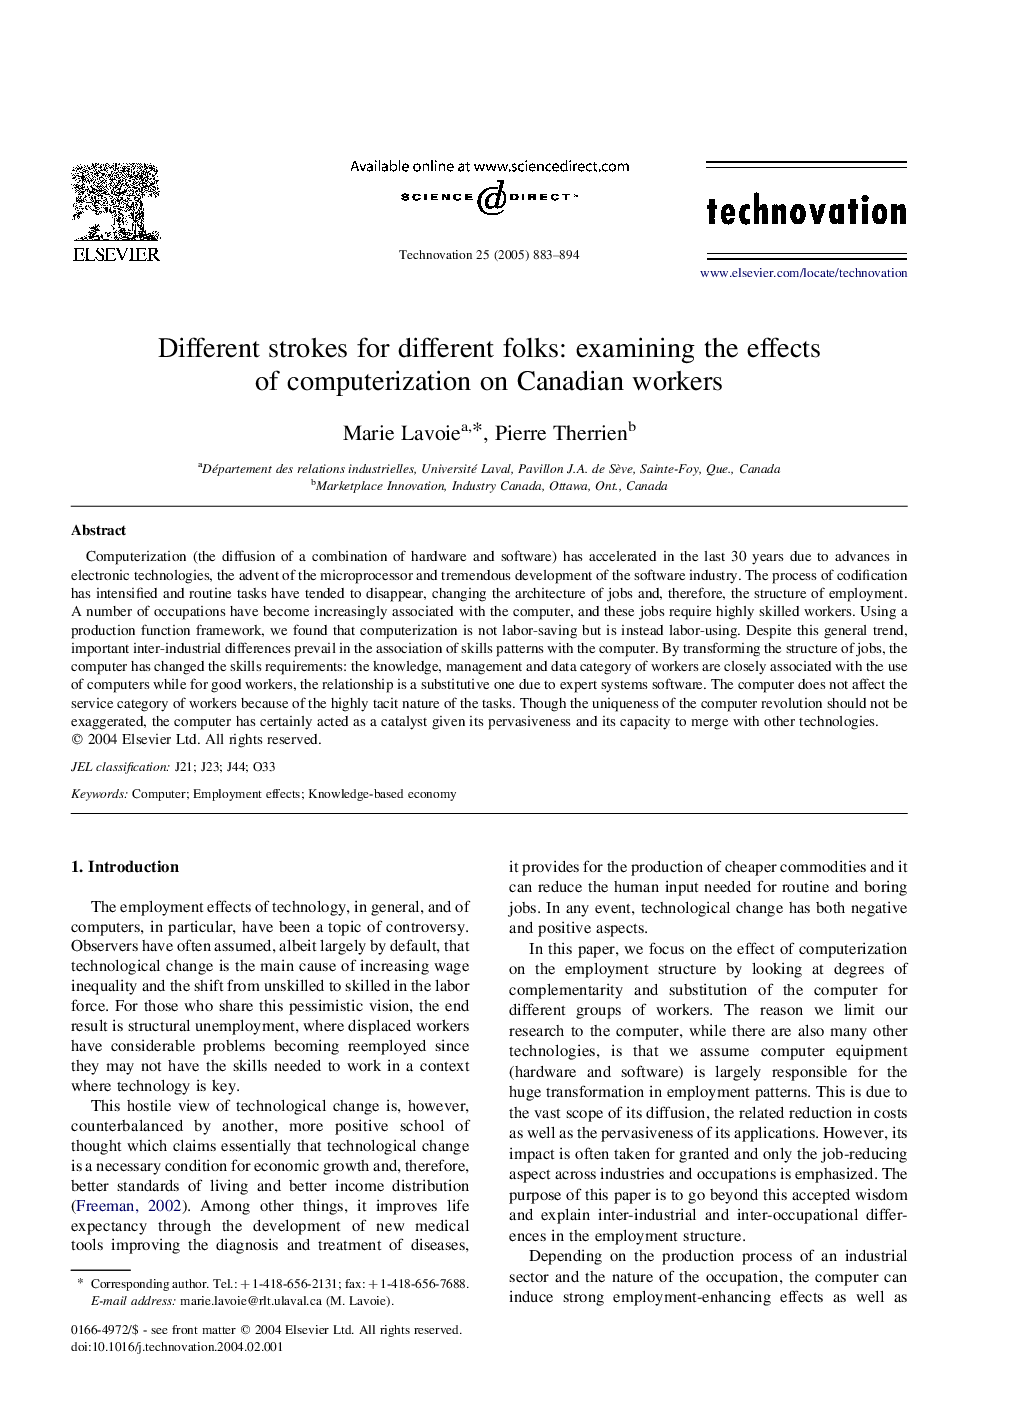 Different strokes for different folks: examining the effects of computerization on Canadian workers